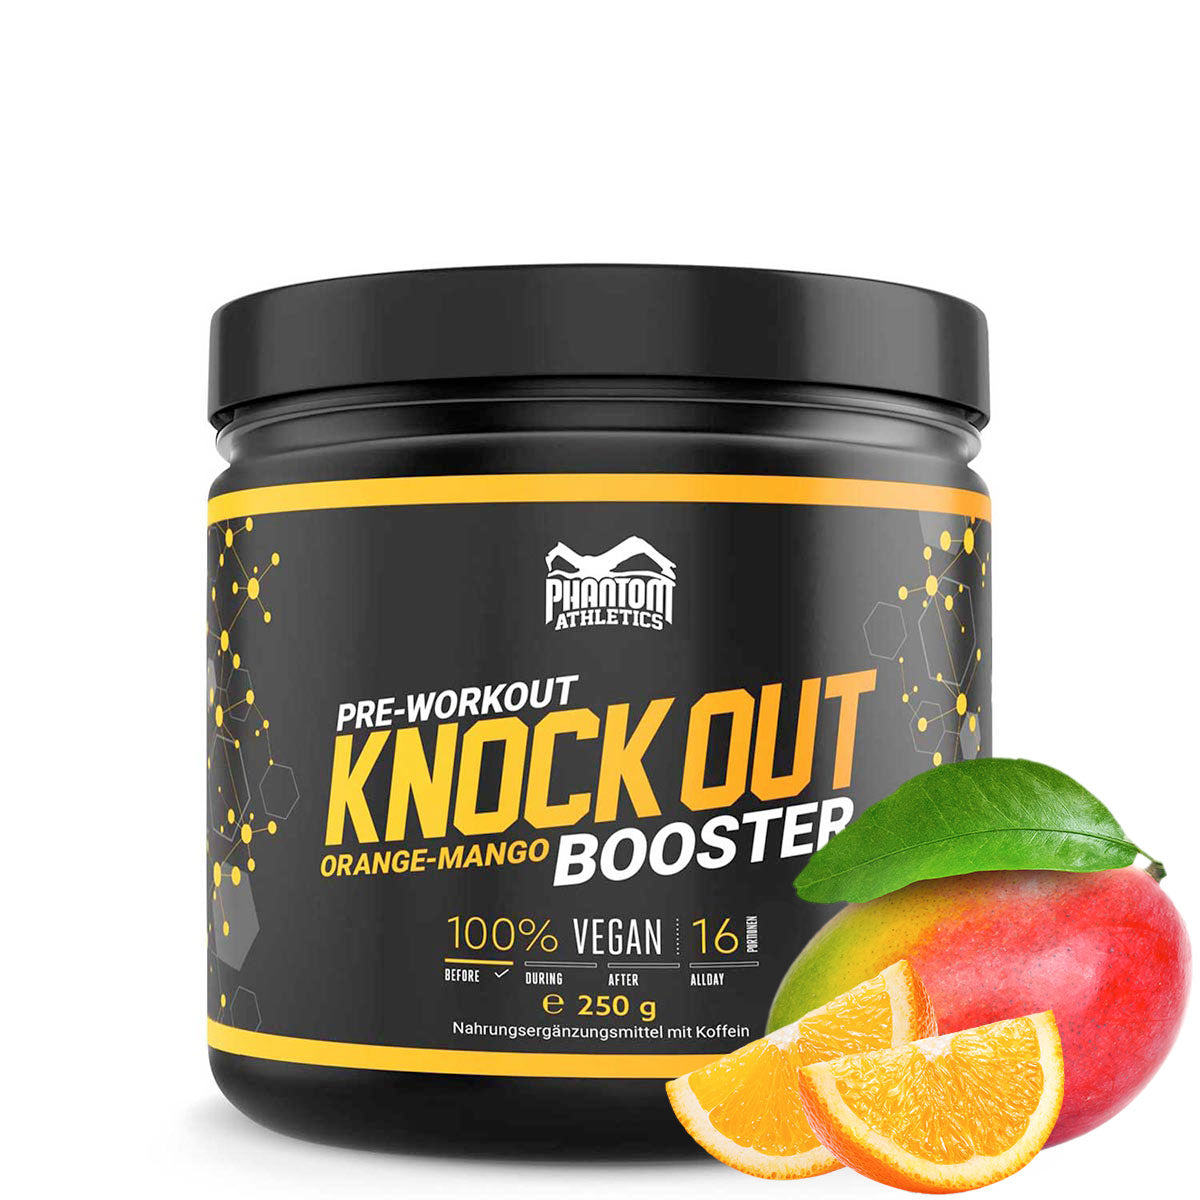 Phantom KNOCKOUT pre-workout booster for more power in martial arts.